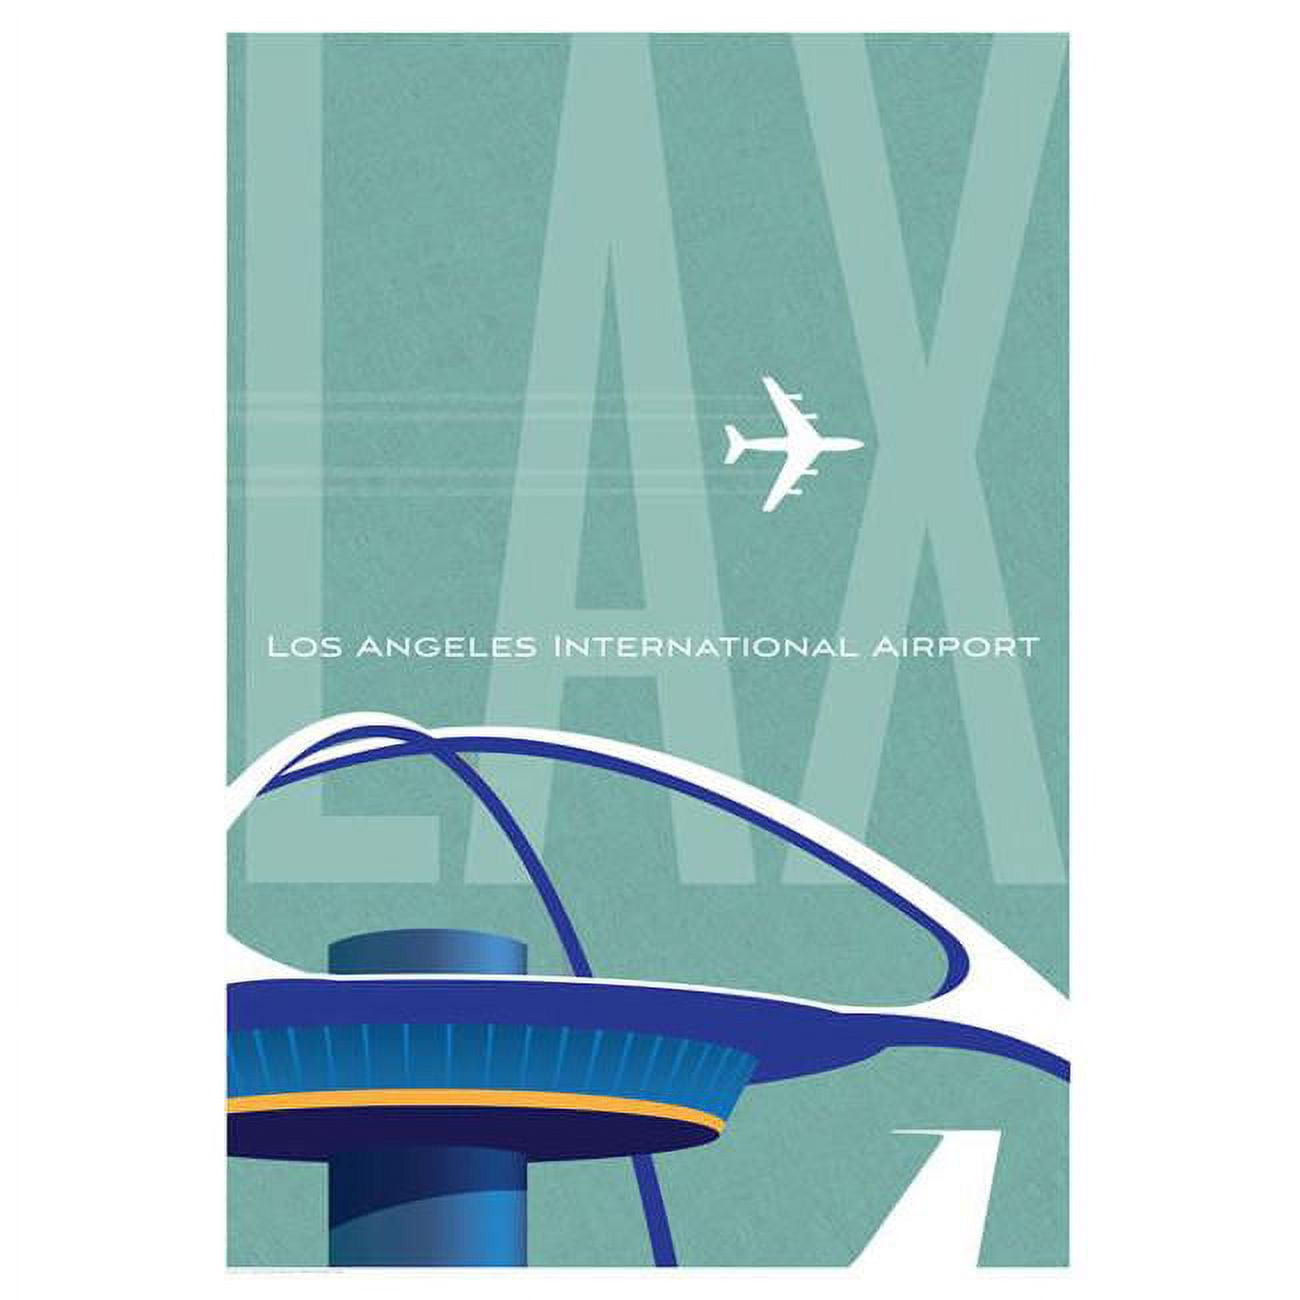 Ja023 14 X 20 In. Lax Los Angeles Airport Poster